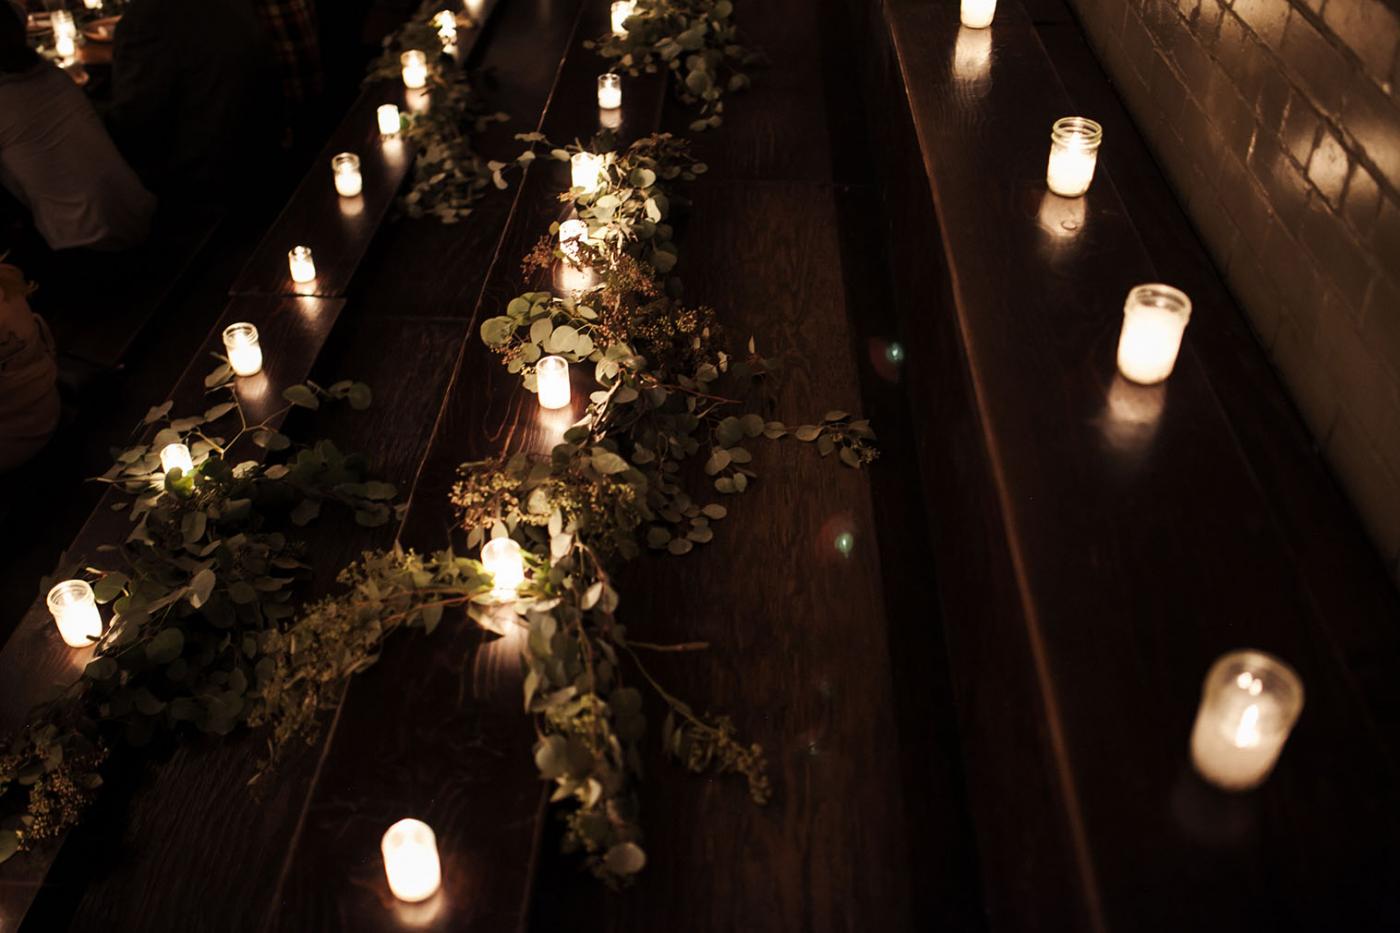 candles and plants lining benches